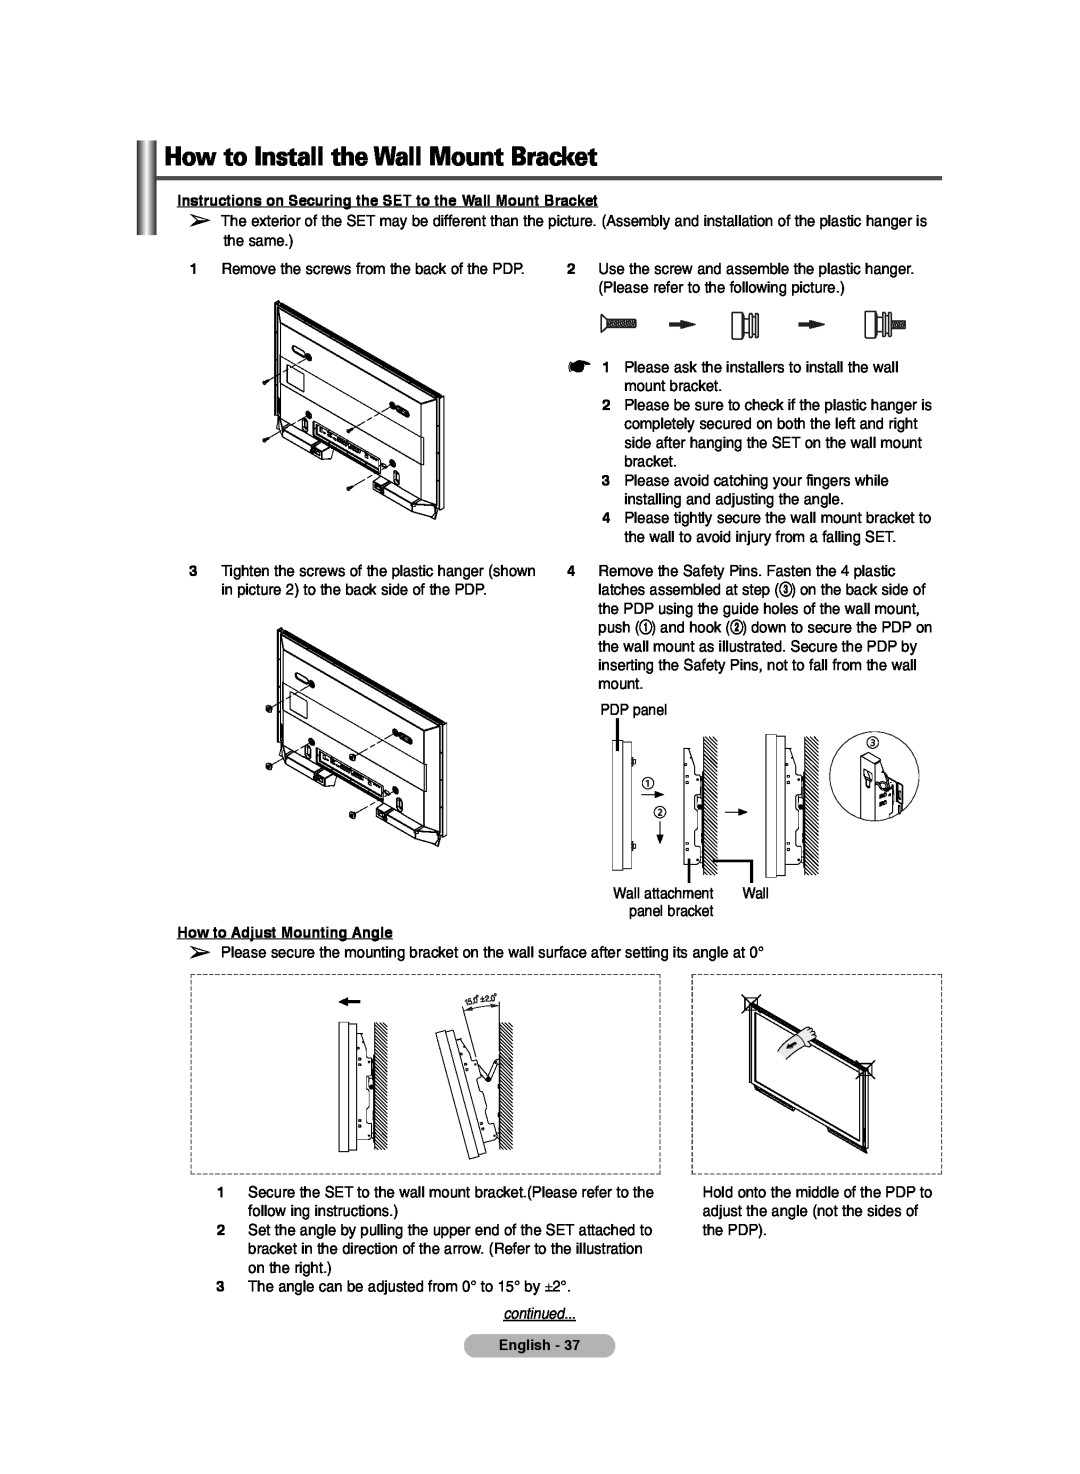 Samsung PS-42E7HD, PS-42E71HD How to Install the Wall Mount Bracket, Remove the screws from the back of the PDP, continued 